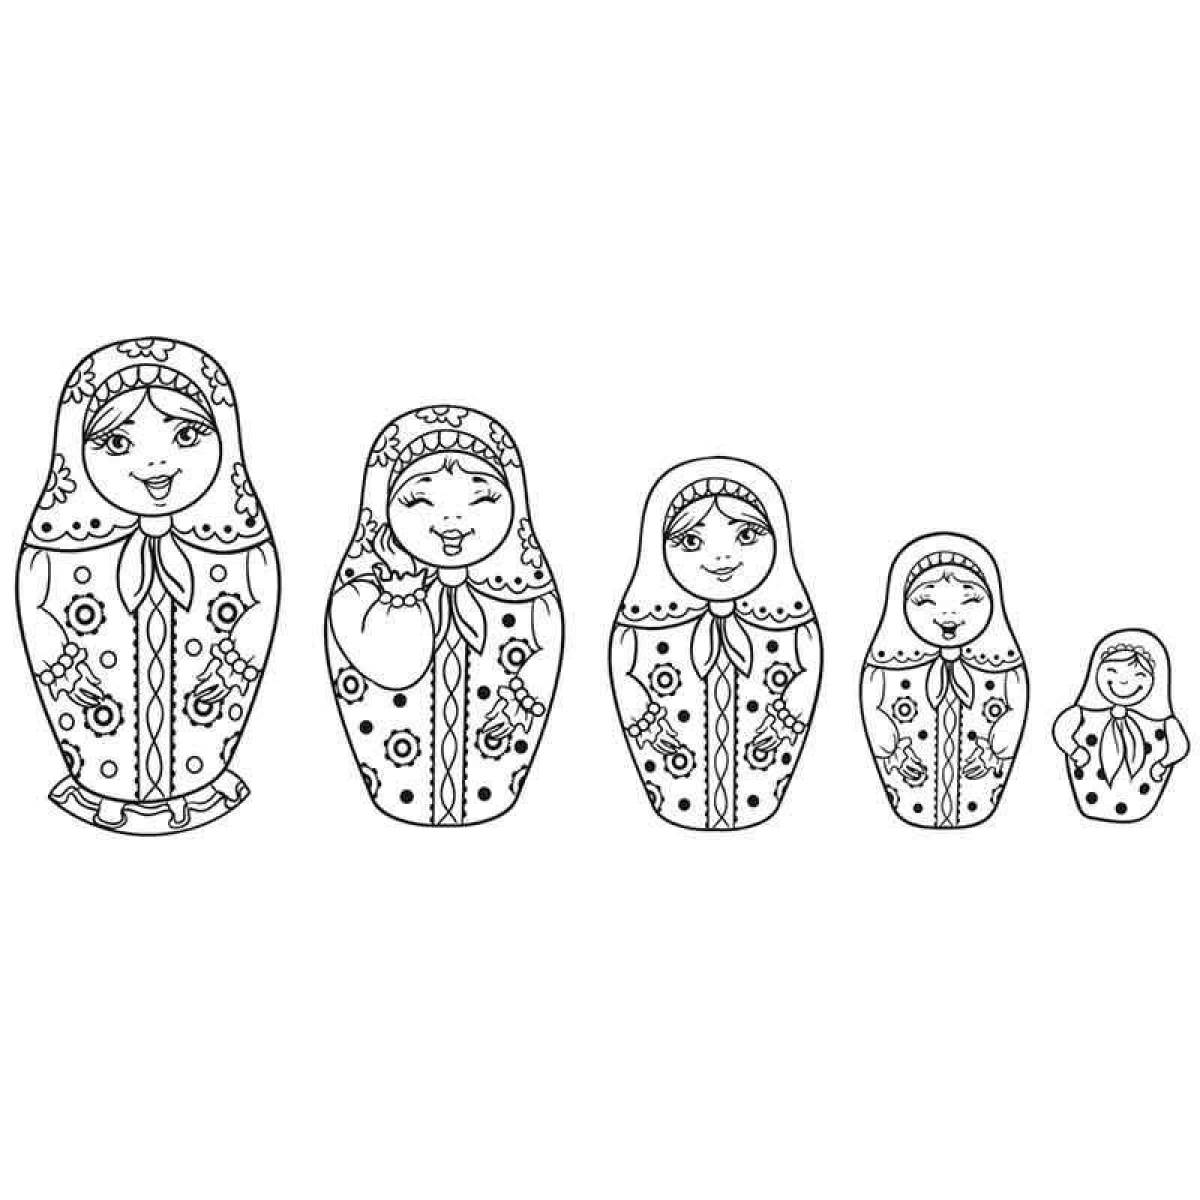 A fascinating matryoshka coloring book for children